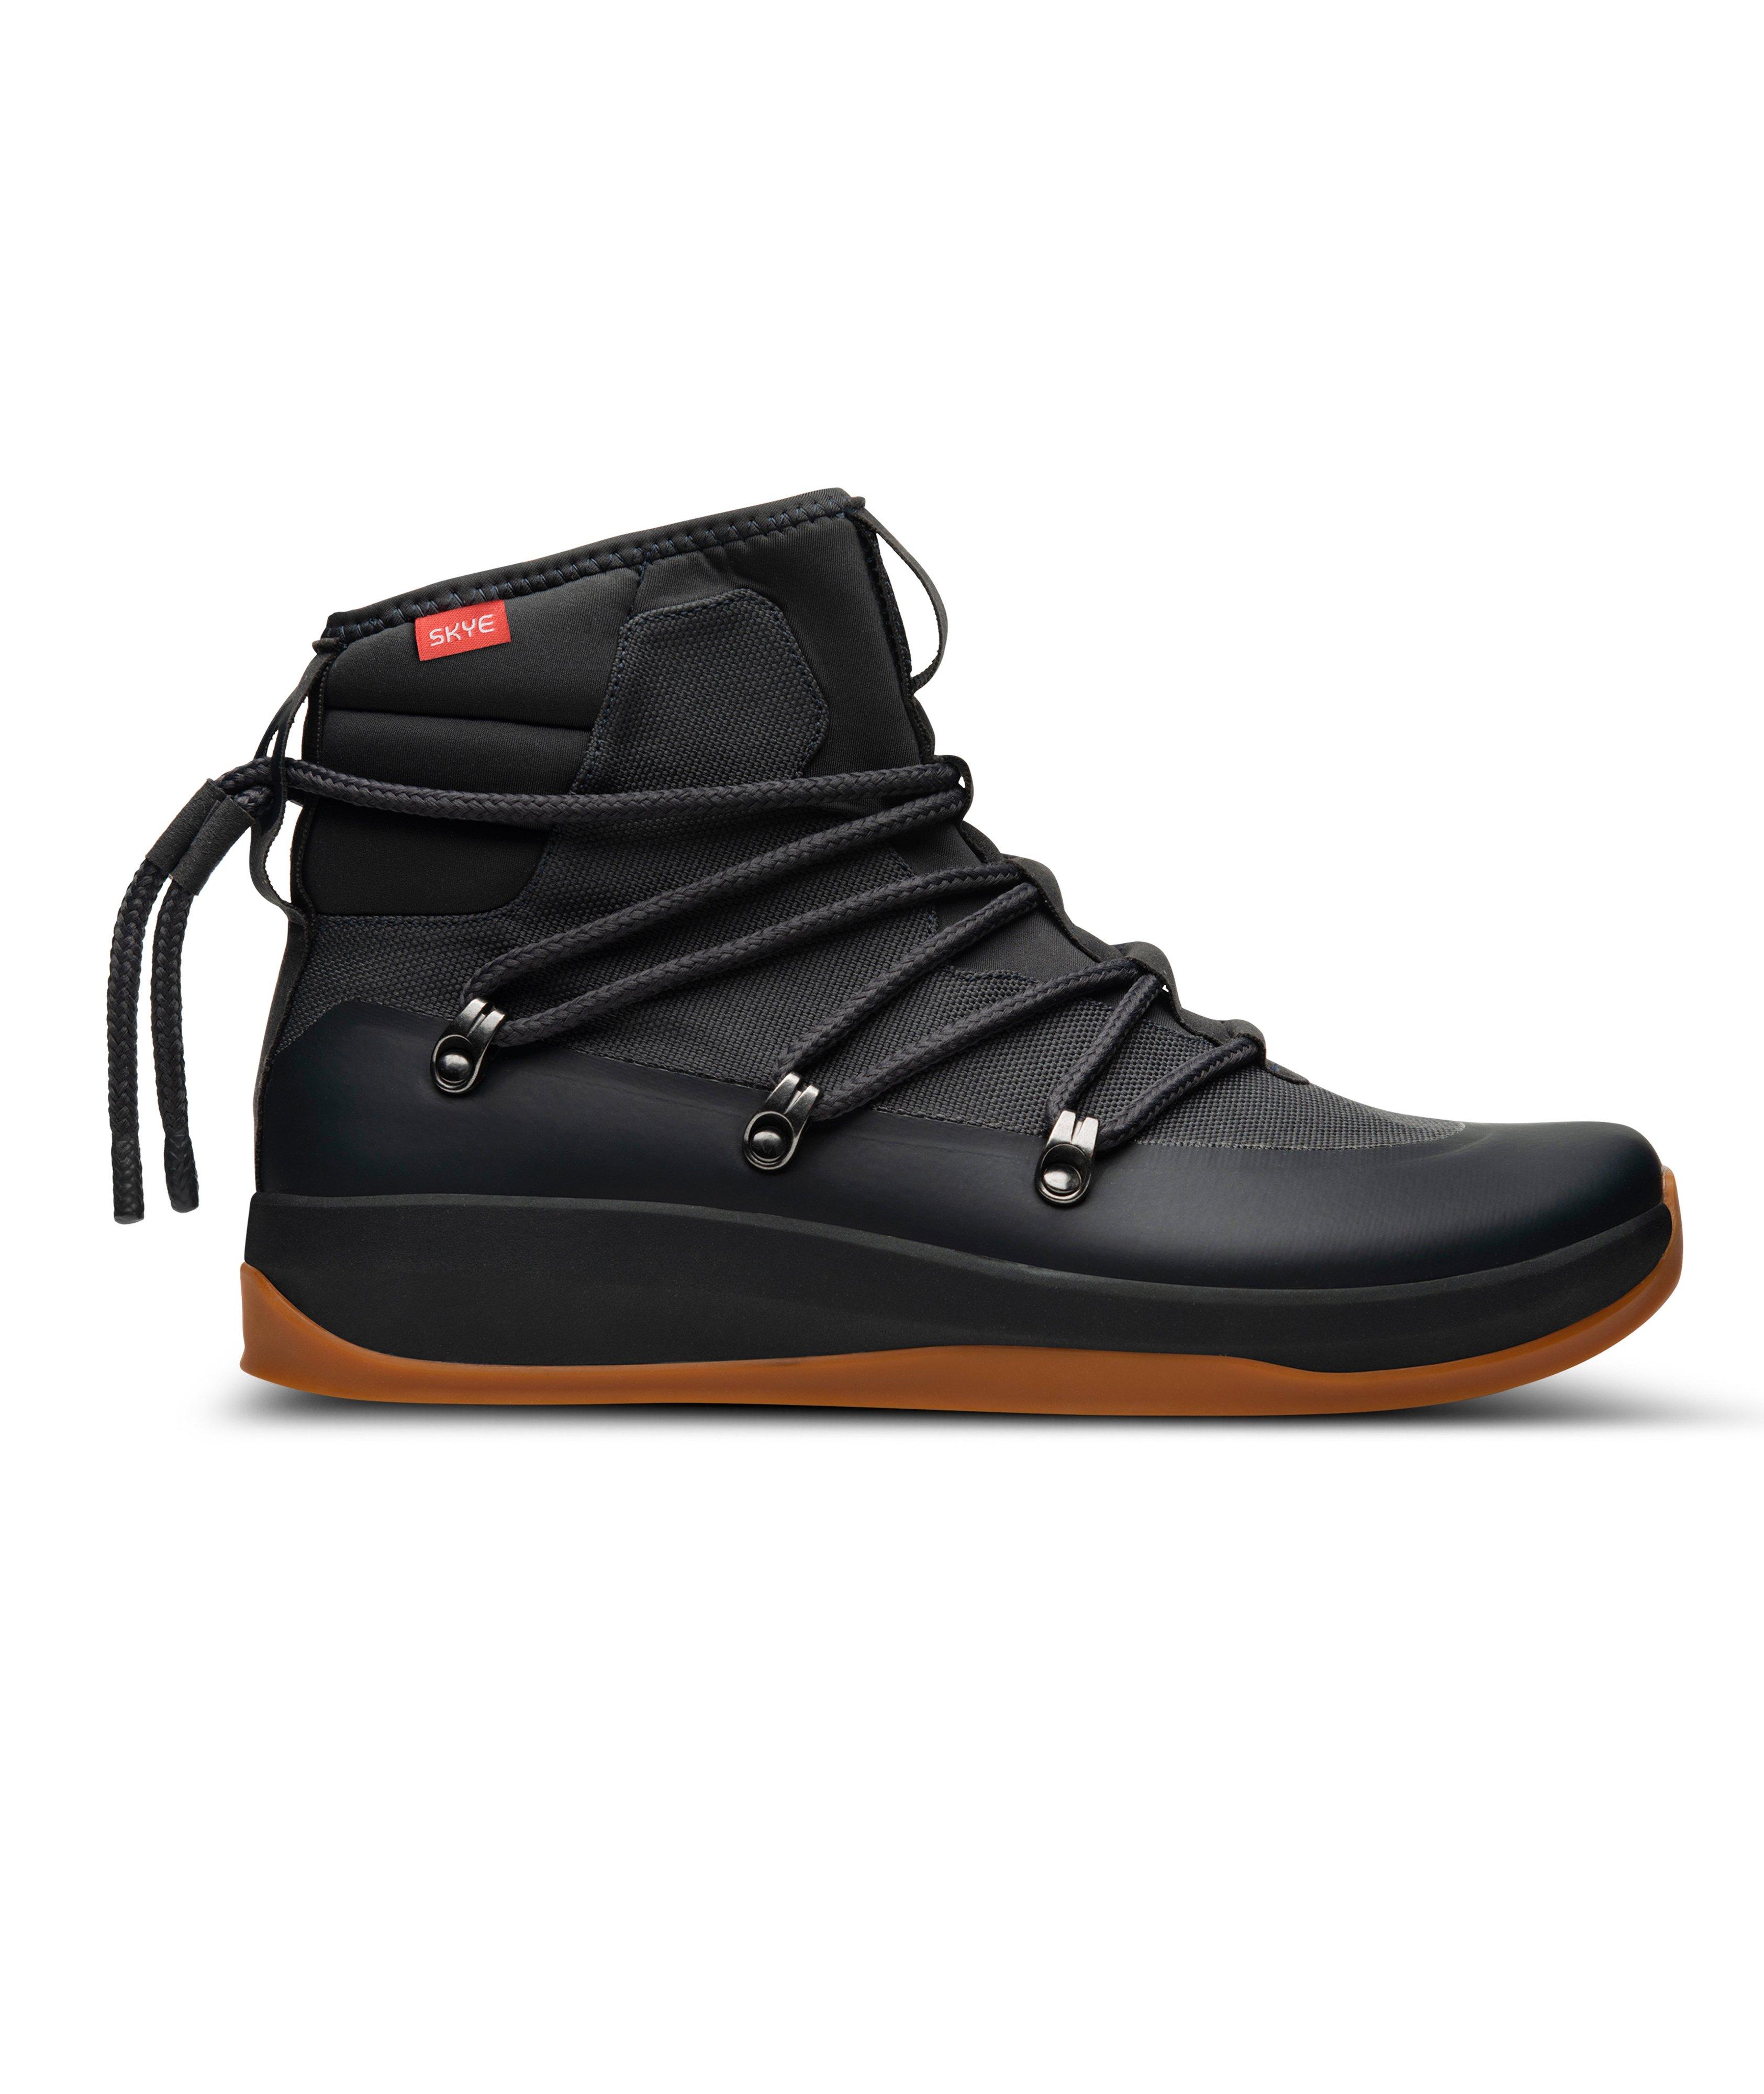 The Stnley 2.0 High-Top Sneaker Boots image 0